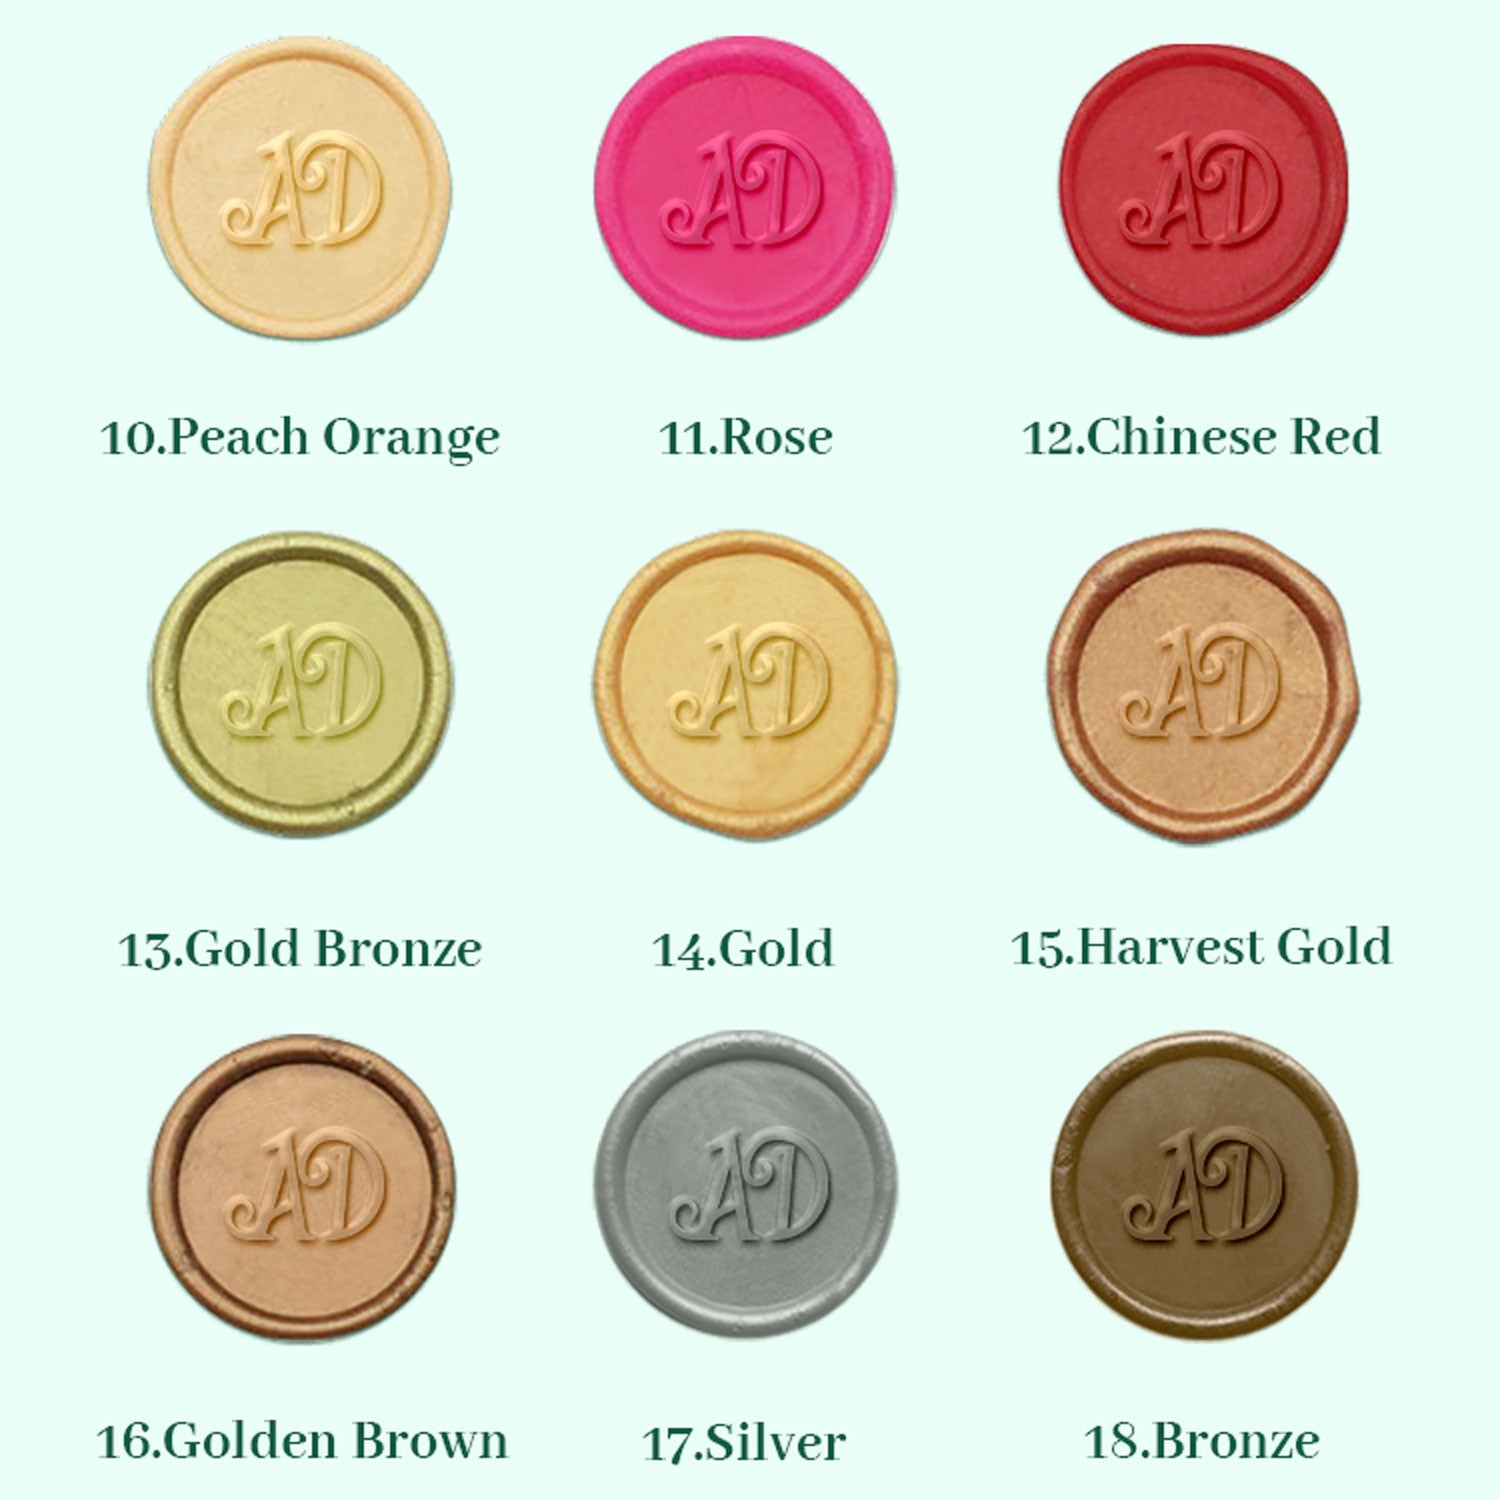 40 Pink and Gold Wax Seal Stickers - Sticky Pre-Made Wax Seals for